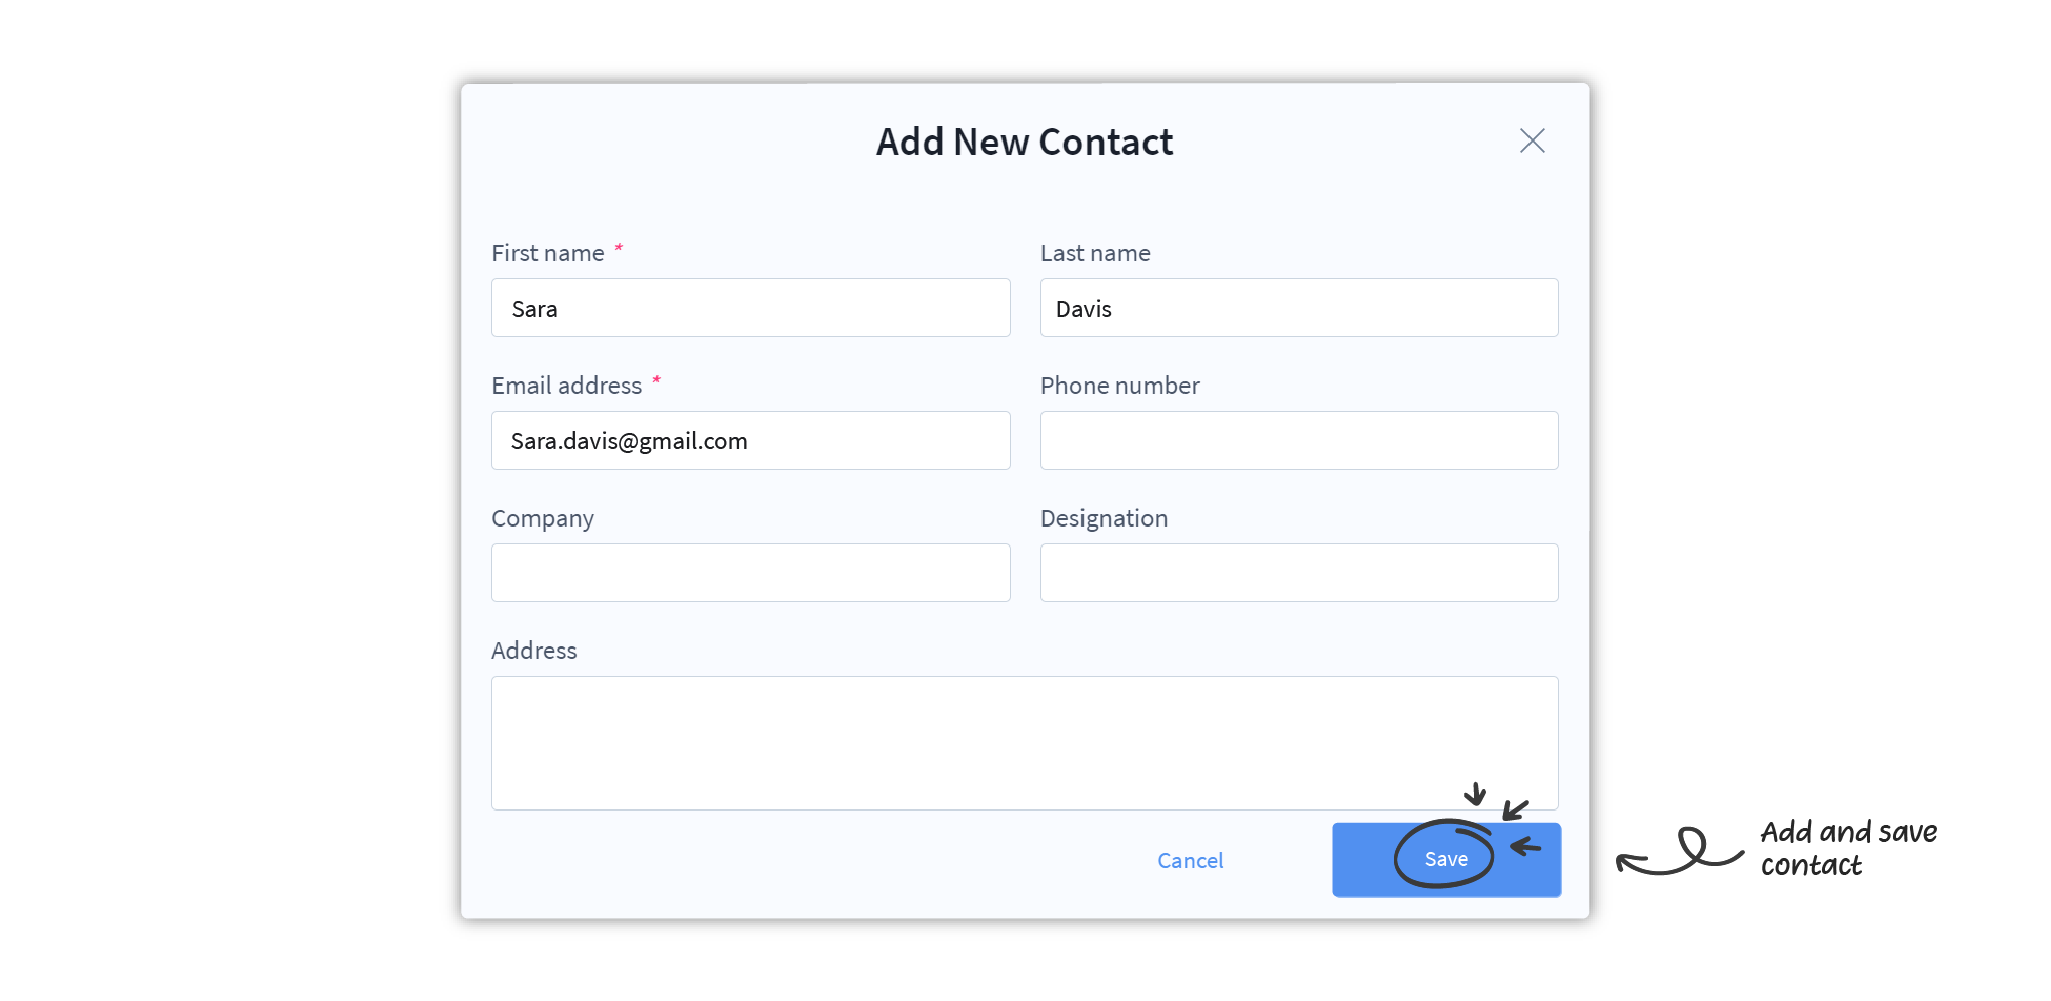 Fill in the details in the Add new contact popup modal and click on Save